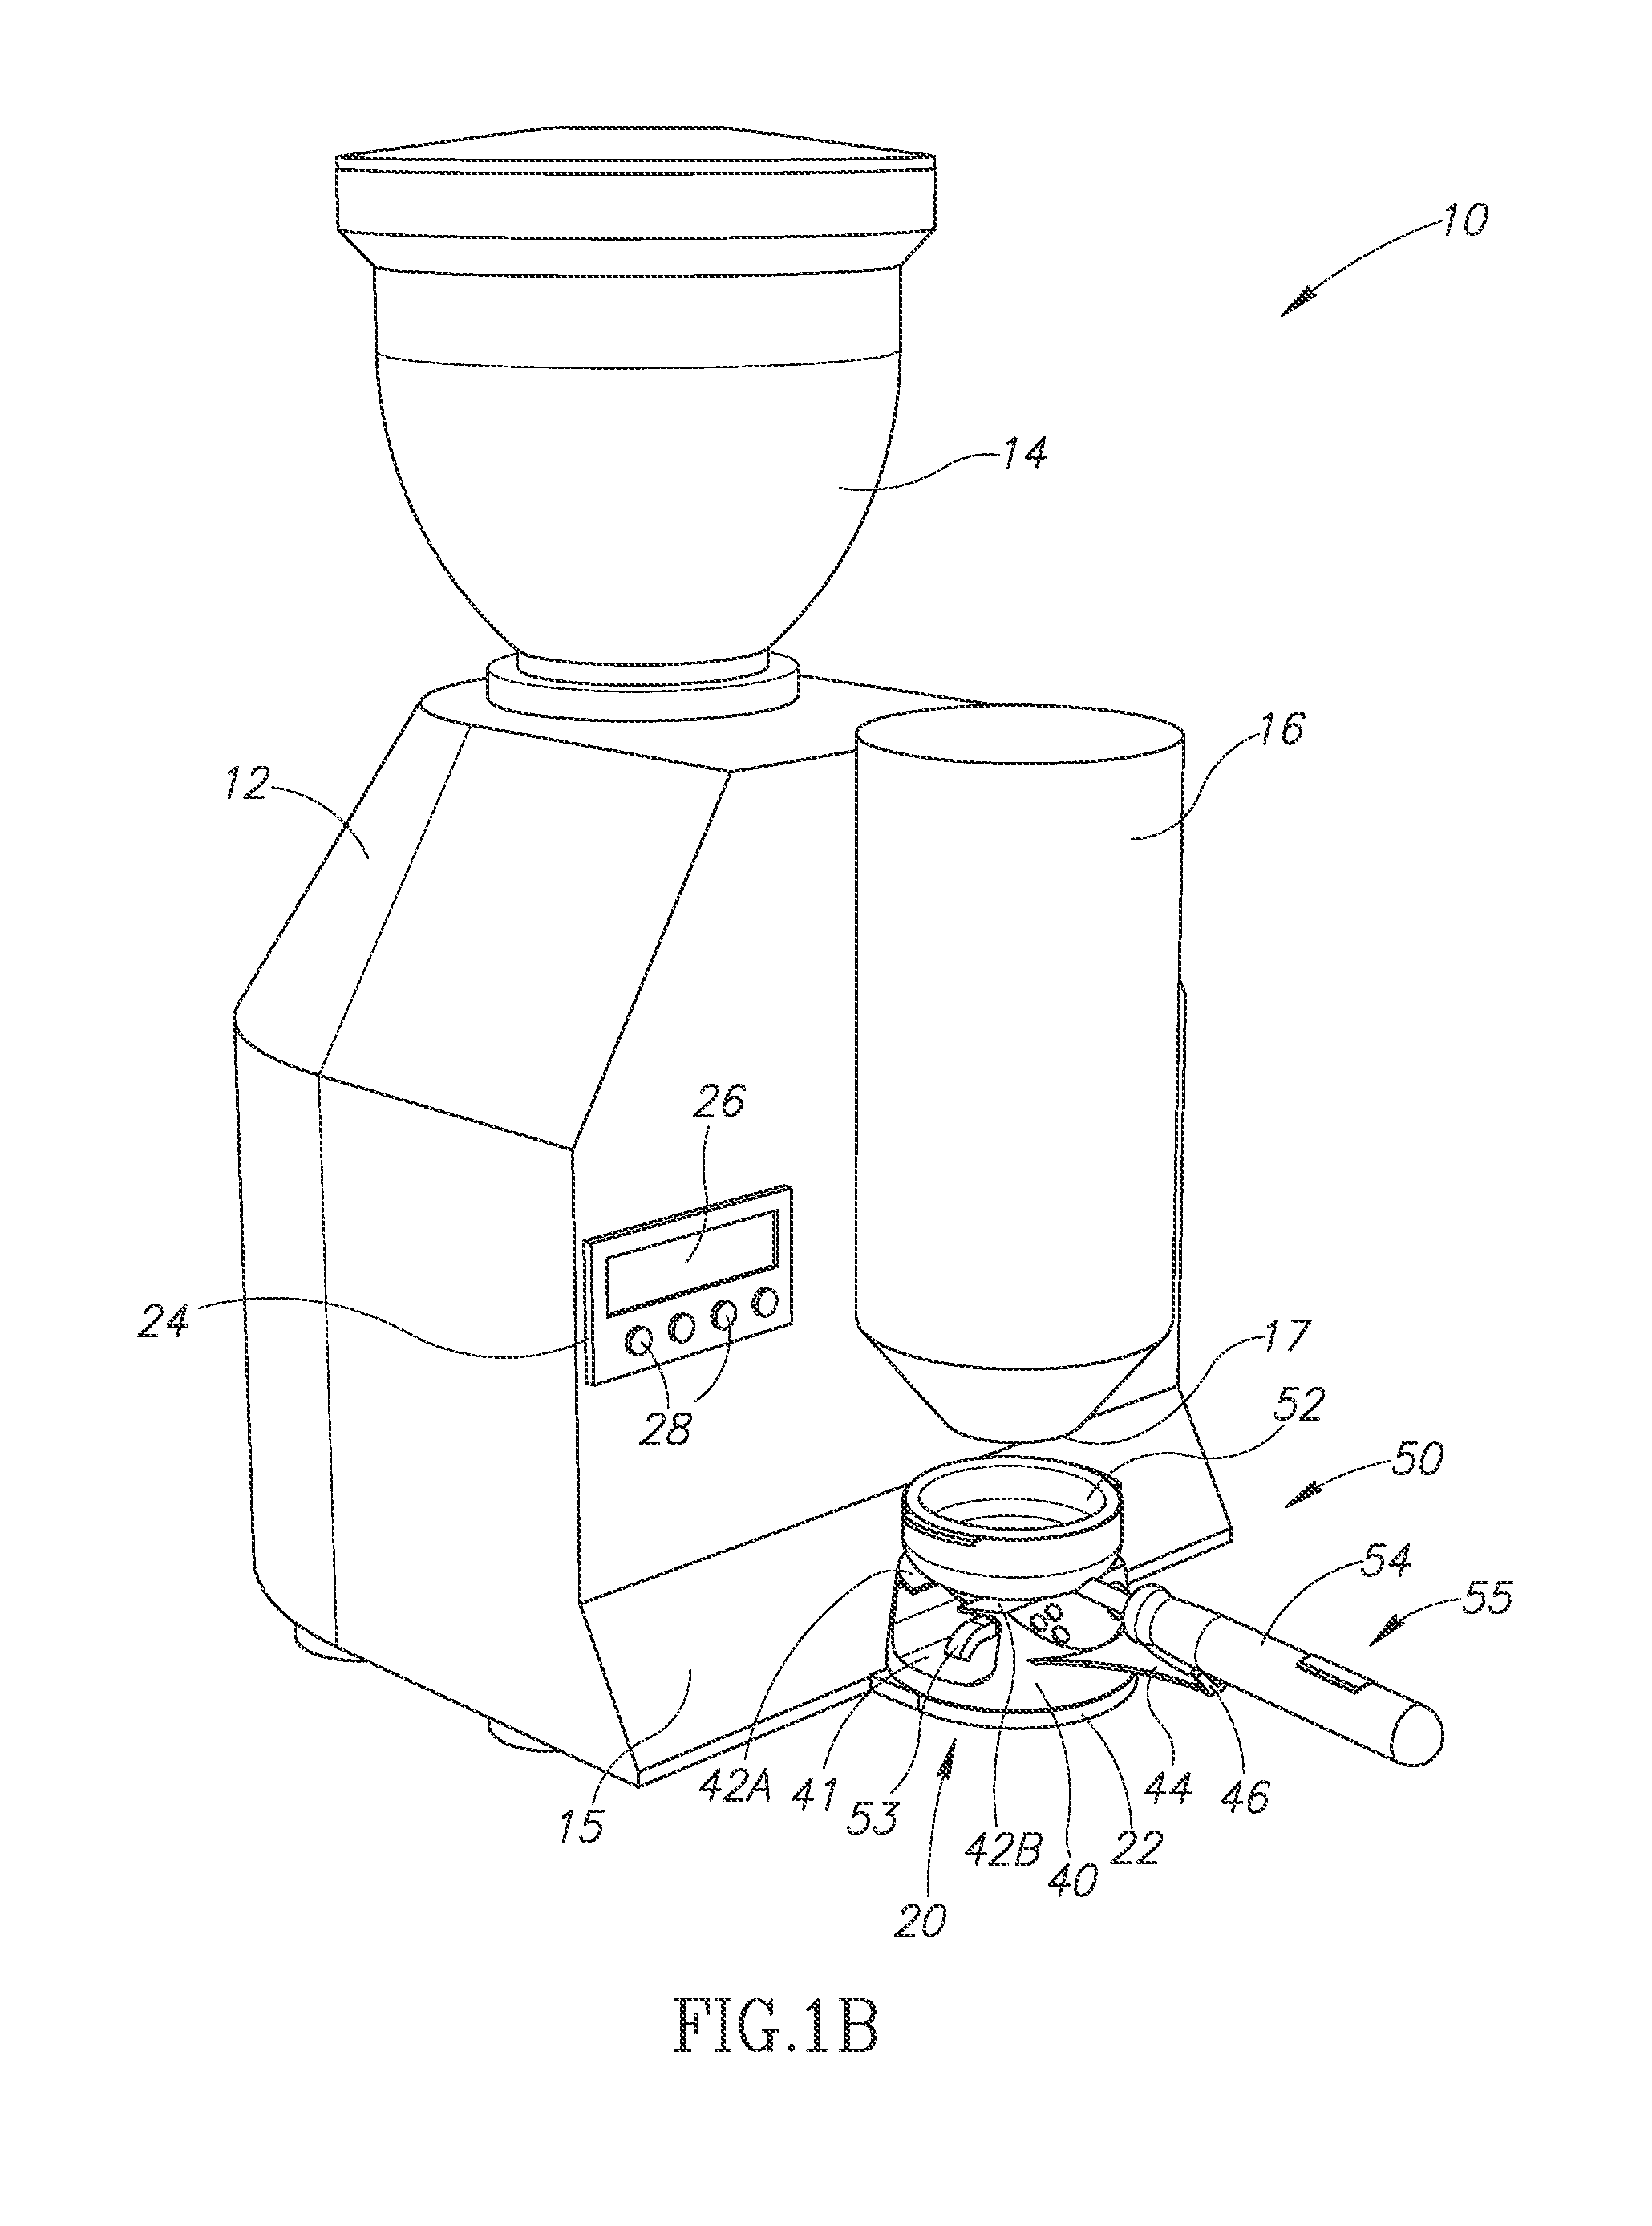 Apparatus for measurement of coffee